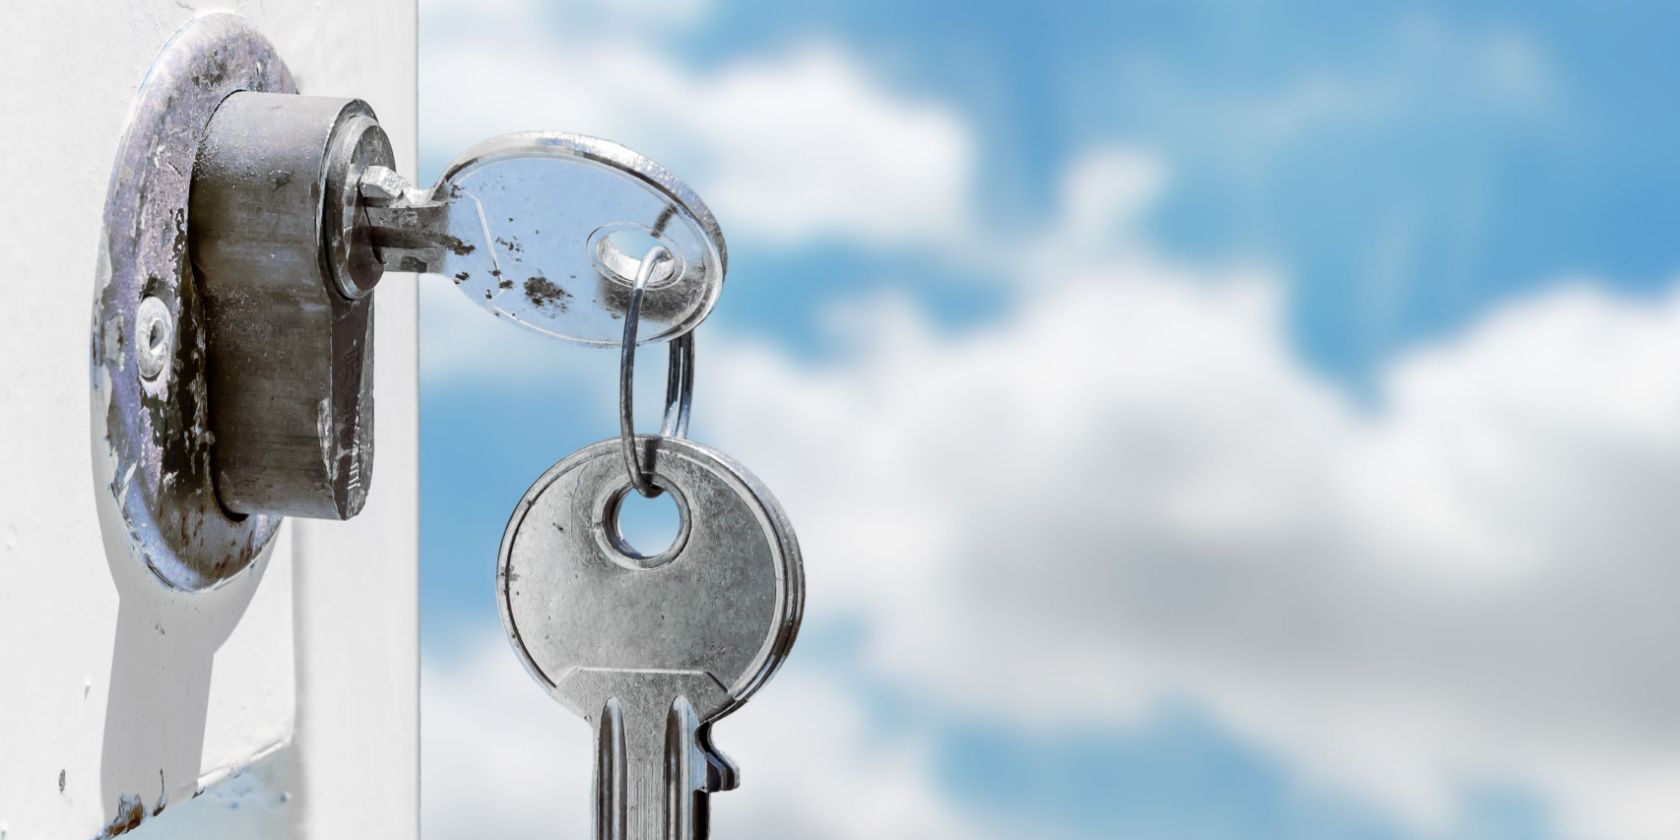 Keys inserted into a lock with sky background